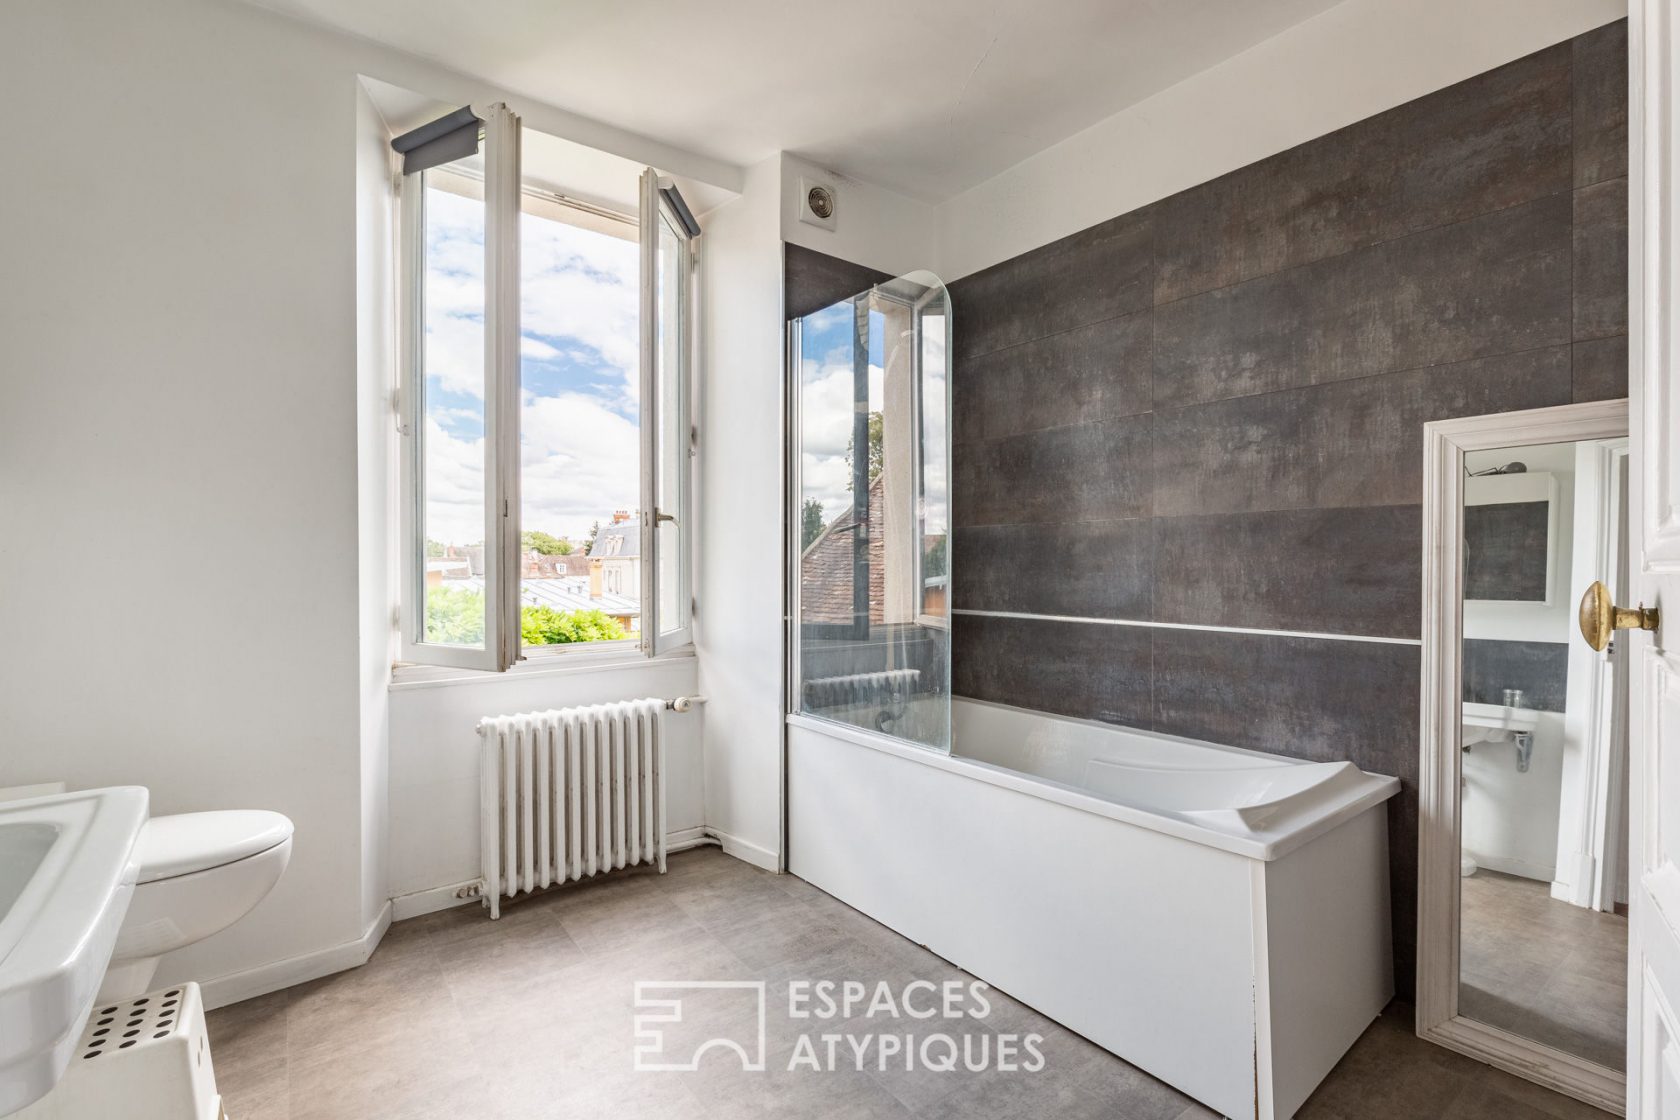 Townhouse in the heart of Fontainebleau